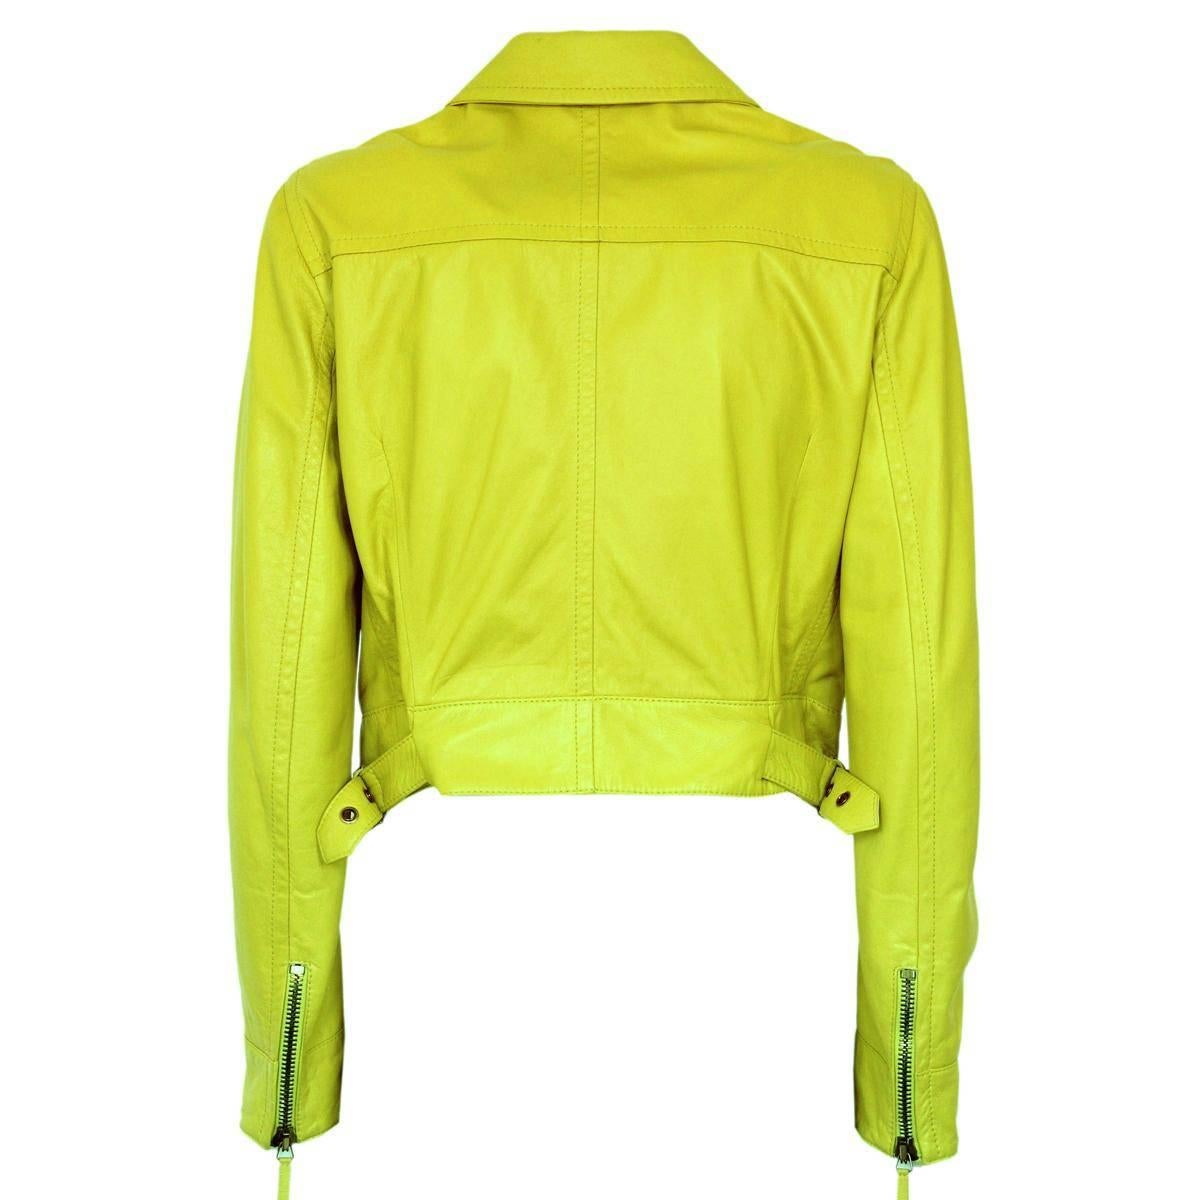 Beautiful Blumarine leather biker 
Lamb leather
Yellow lemon color
Central zip
External zip pocket
Zip on wrists
Original price €  1480
Very good conditions, light signs near zip (not visible if closed, see picture 5)
Made in Italy
Italian size 42